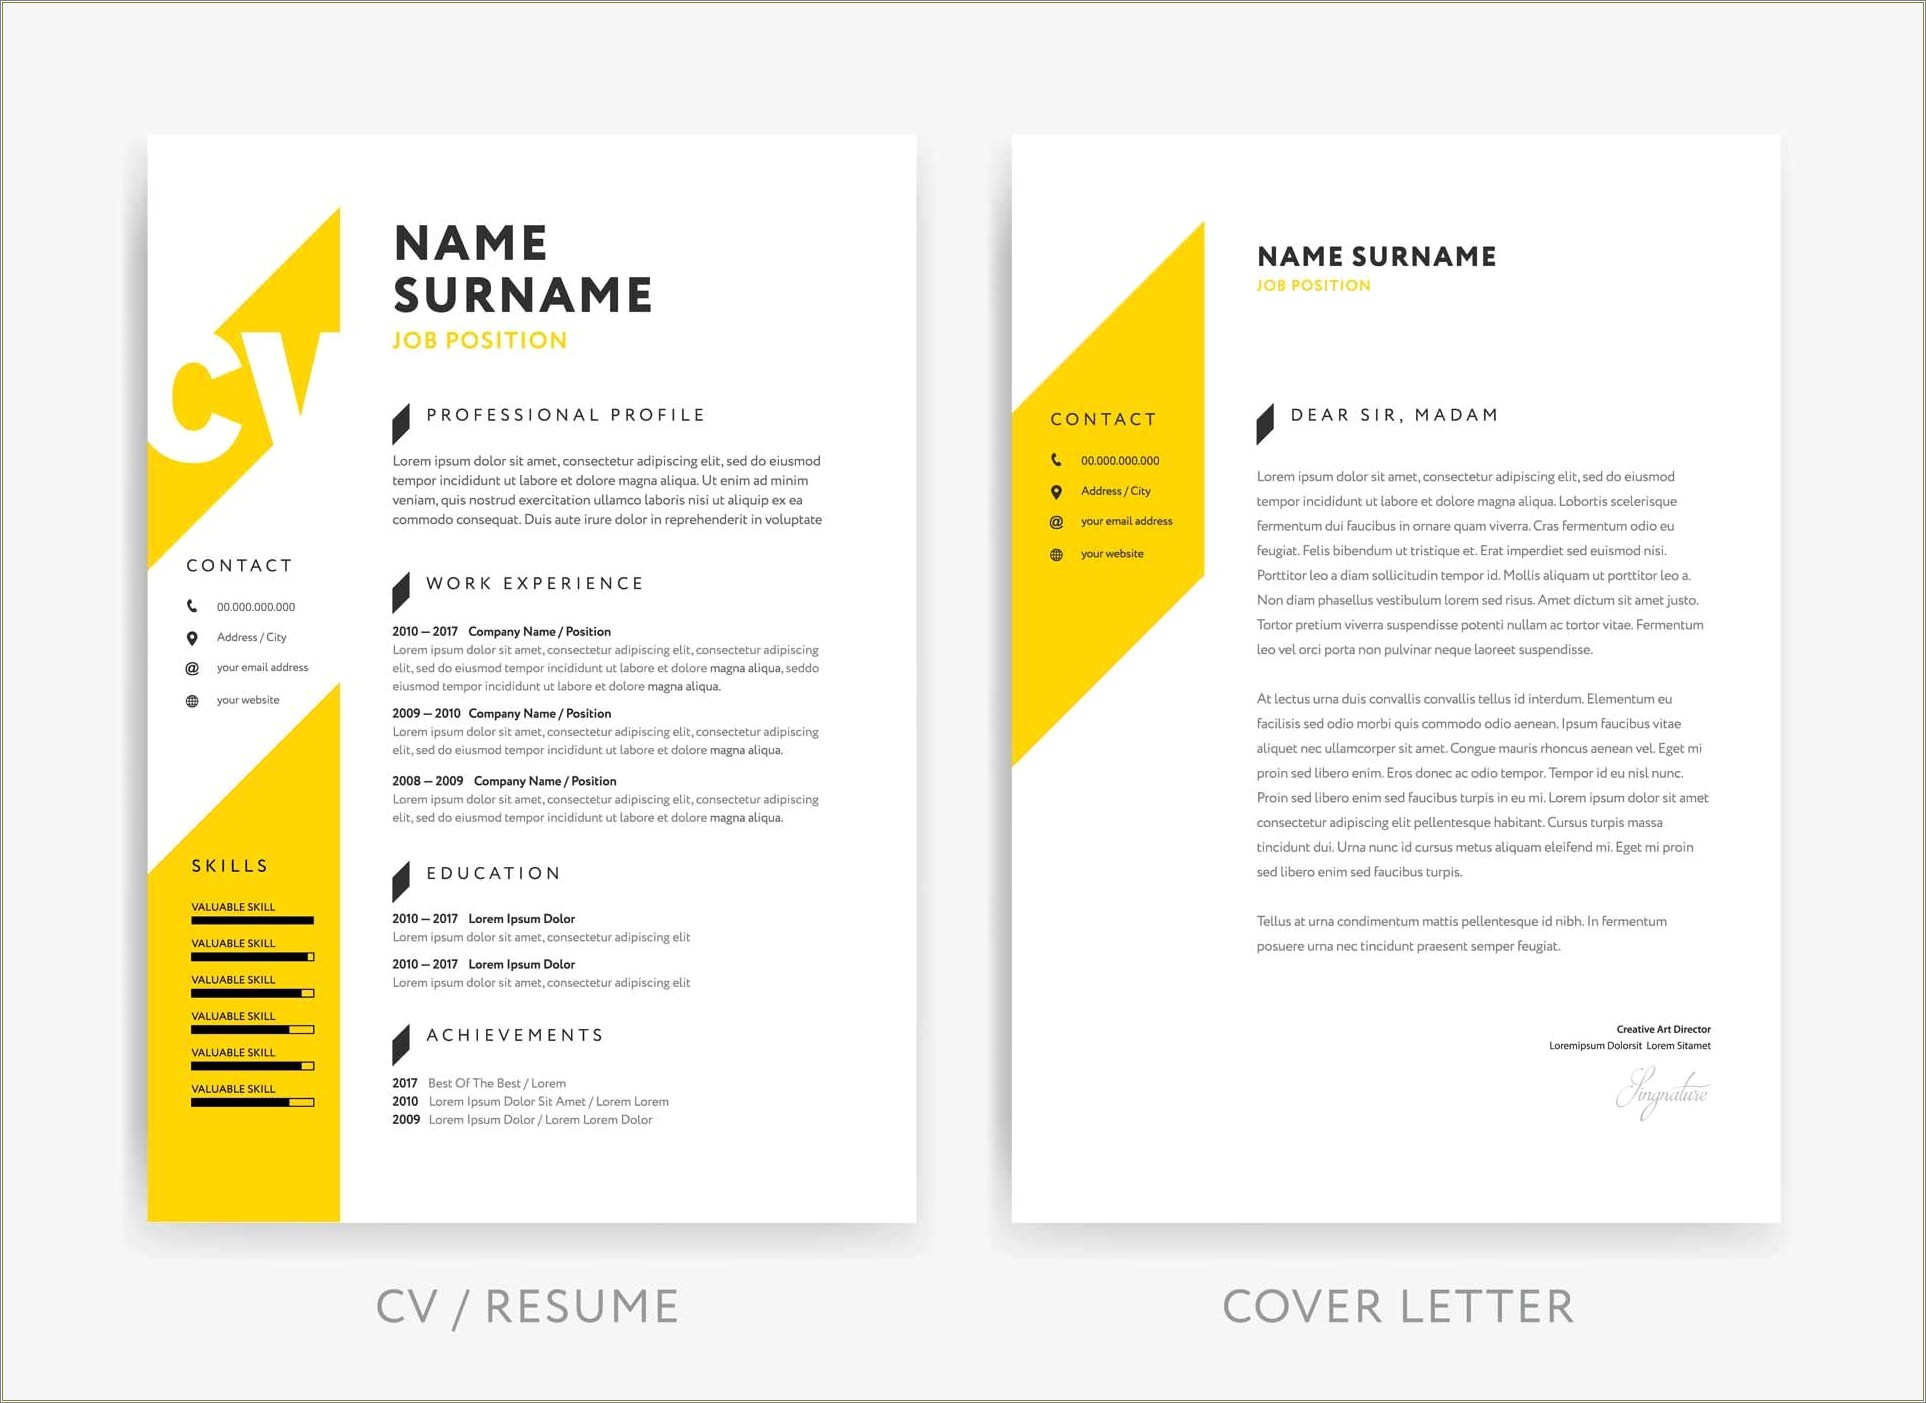 Resume Cover Letter To Whom May It Concern